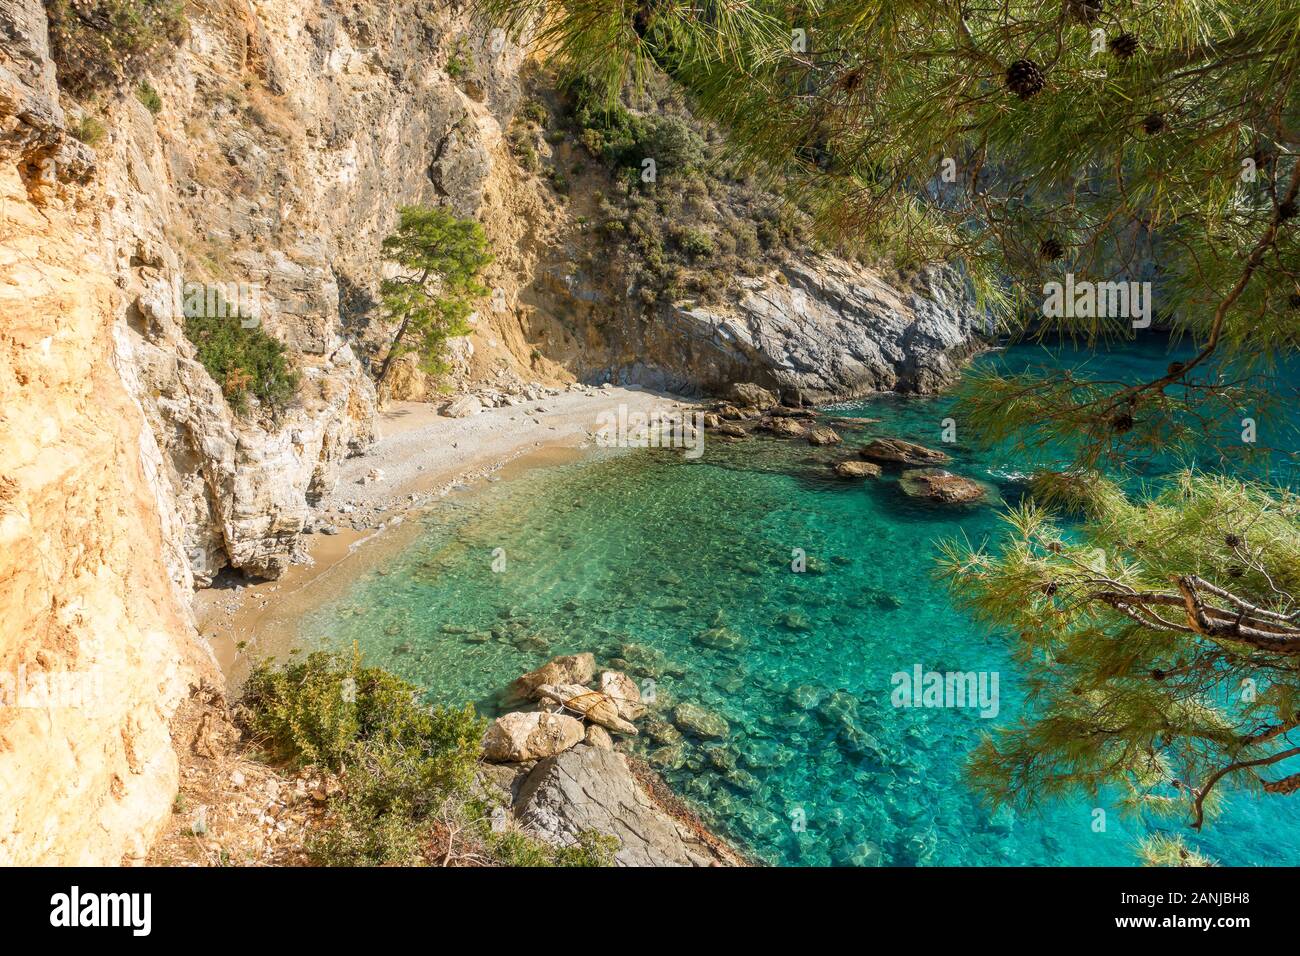 Secluded beach seen from the hiking trail between Gemiler Beach and Afkule, Fethiye, Aegean Turquoise coast, Anatolia, Turkey, Asia Minor, Eurasia Stock Photo